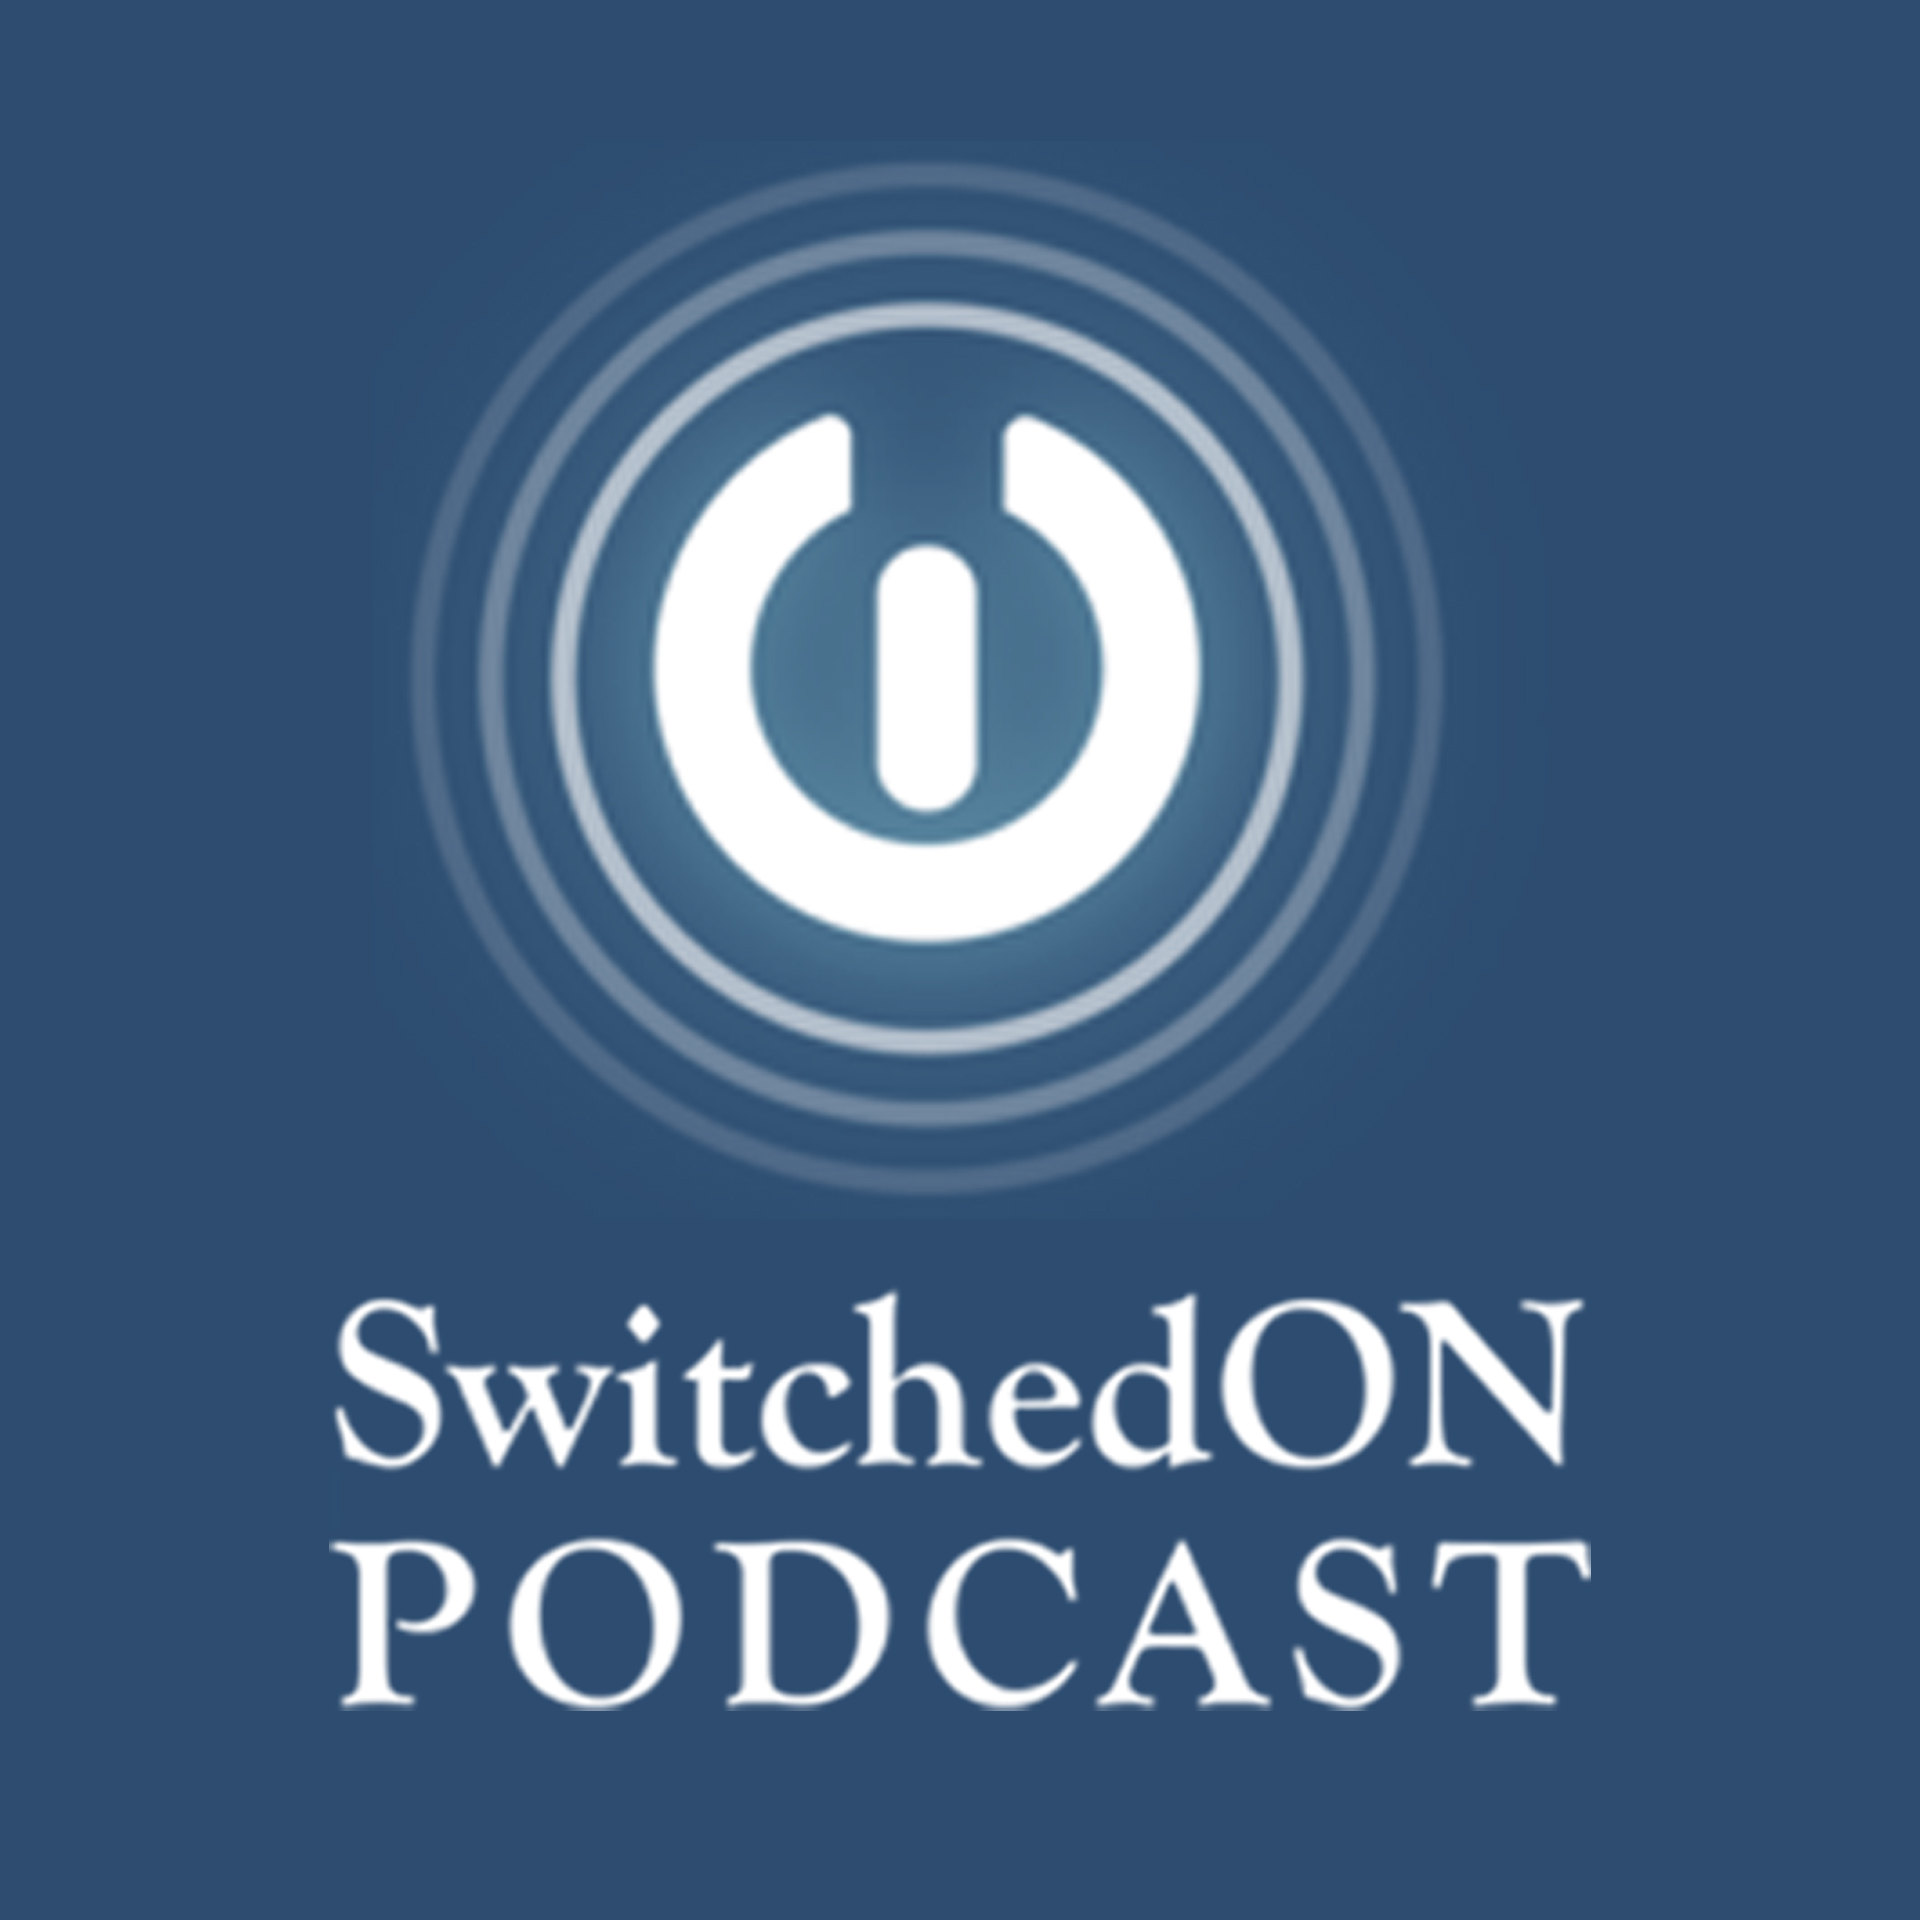 SWITCHED ON! Podcast